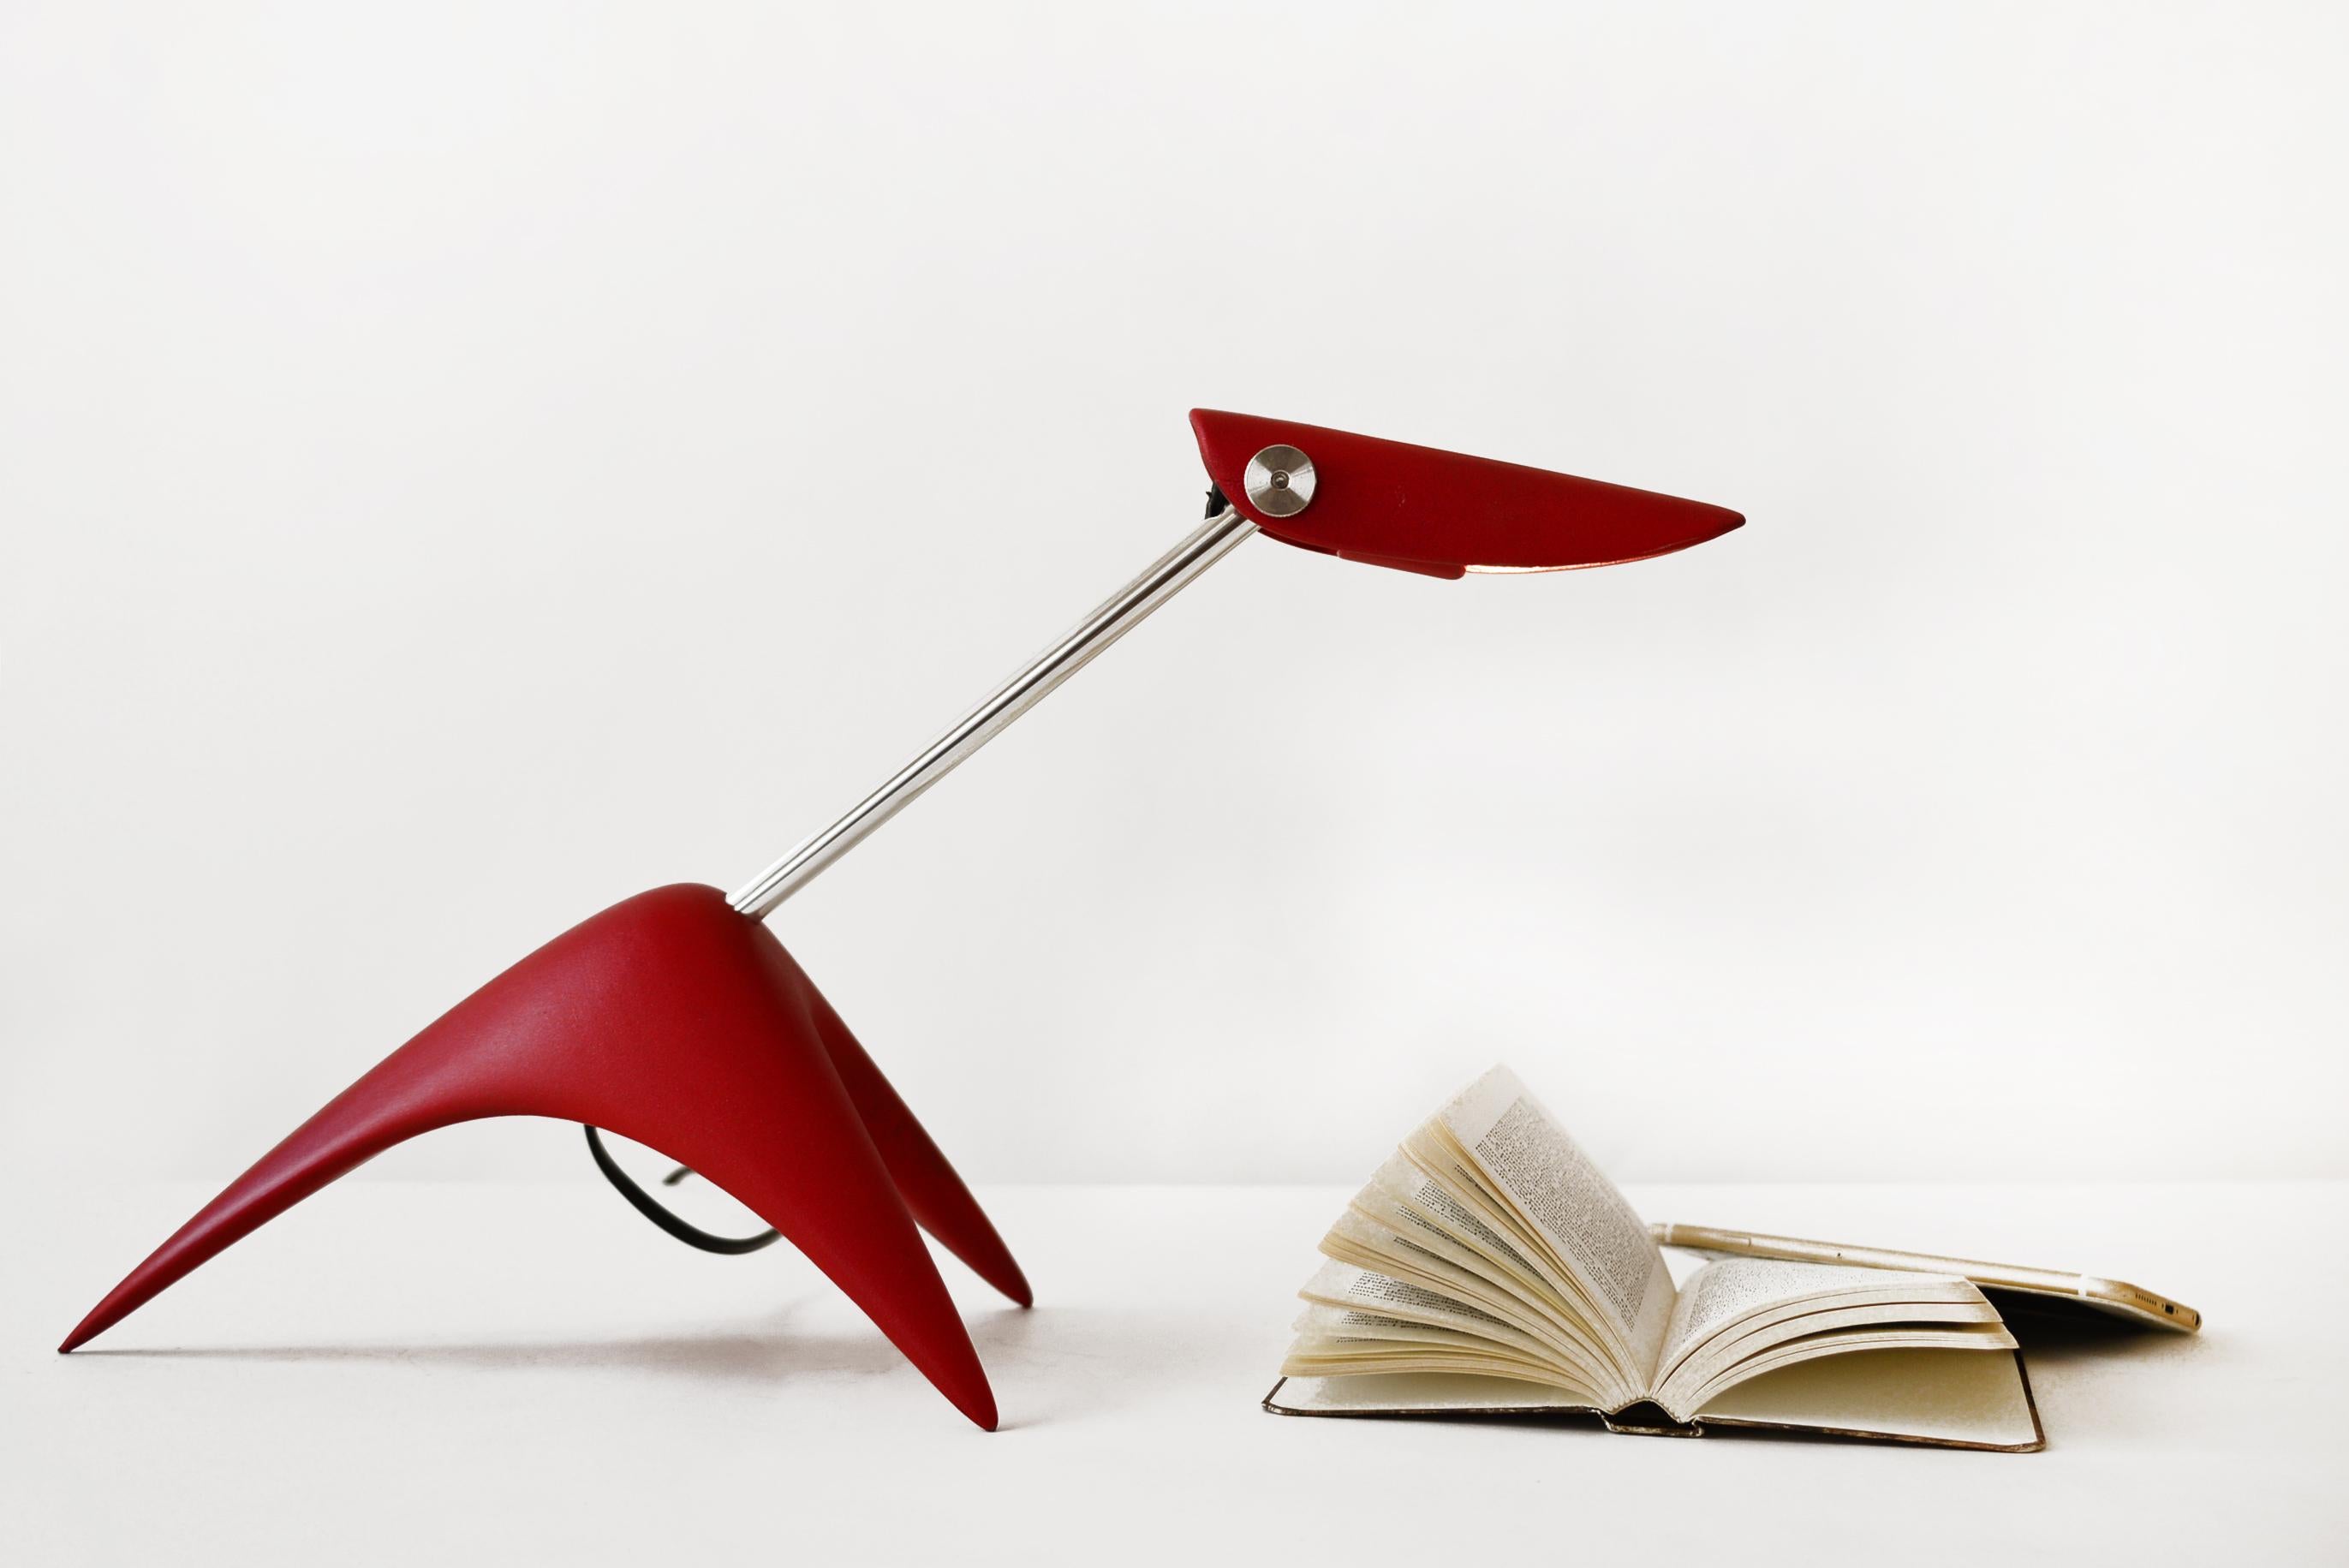 3-Pop Desk Lamp by Lucio Rossi
Dimensions: D 16 x W 48  x H 25 cm
Material: Lacquered recycled plastic, aluminum, stainless steel.
Weight: 0,65 kg
Available in 4 colors: matte white, varano red, metallic purple, and Argentina's blue.

Compact,